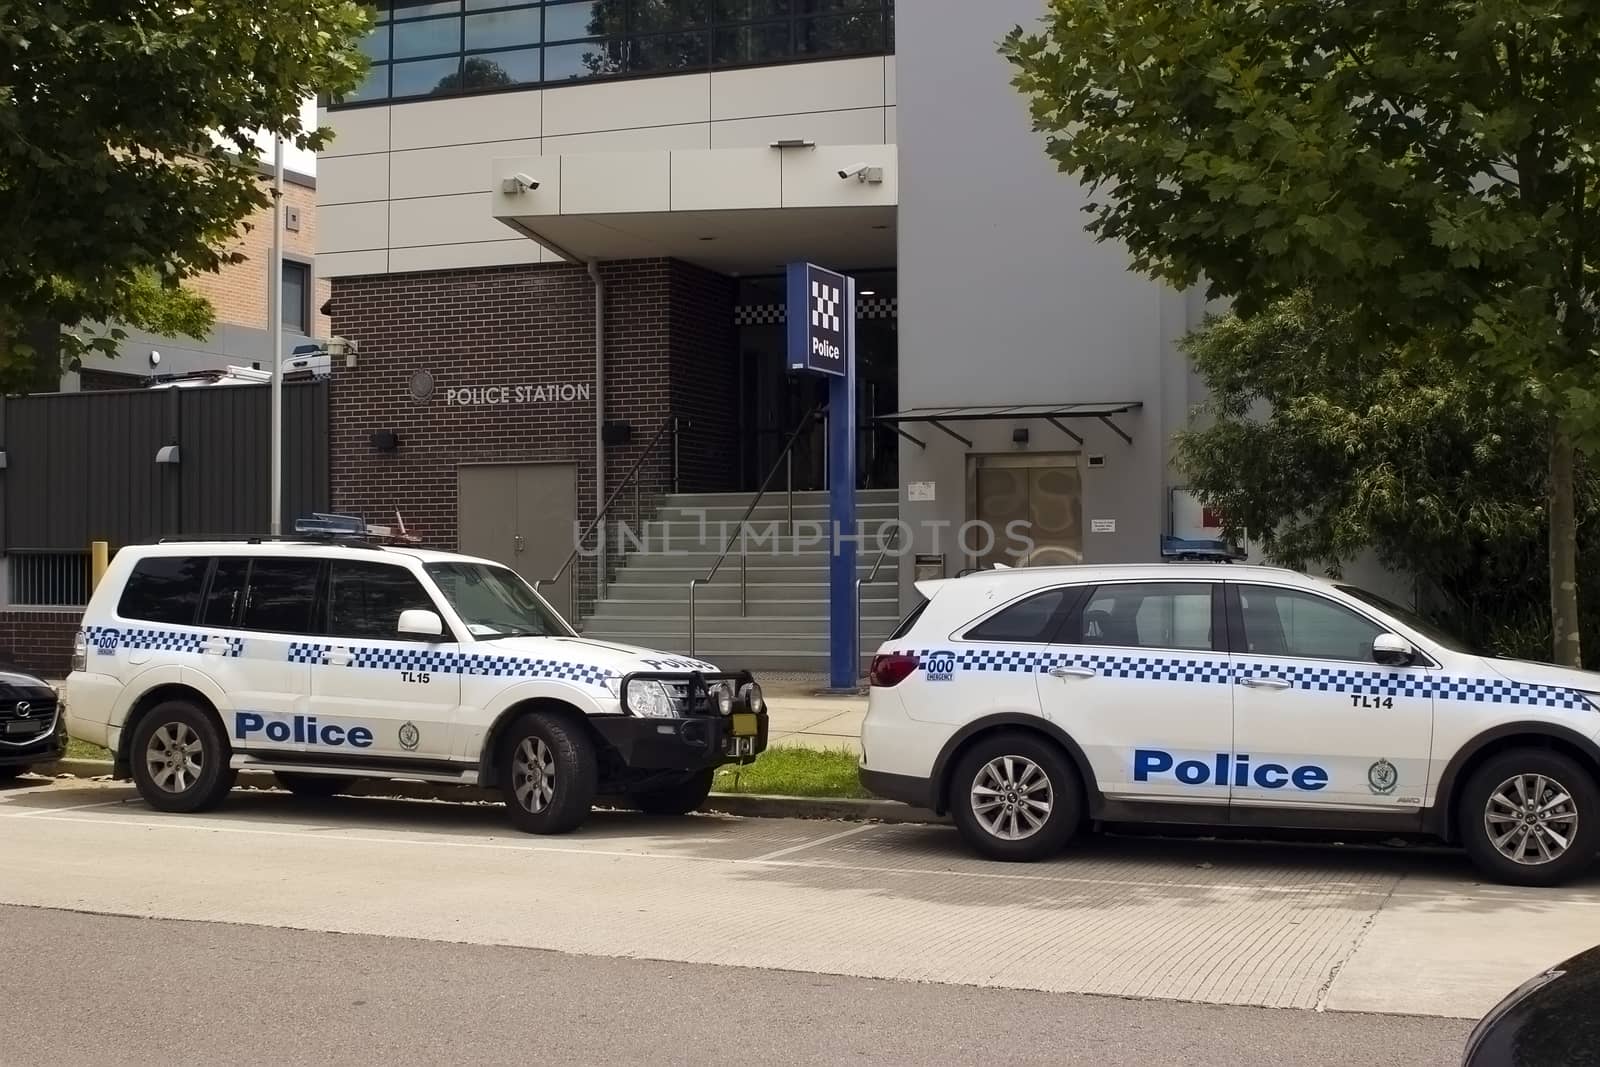 Two Police vehicles outside a local Police Station by definitearts